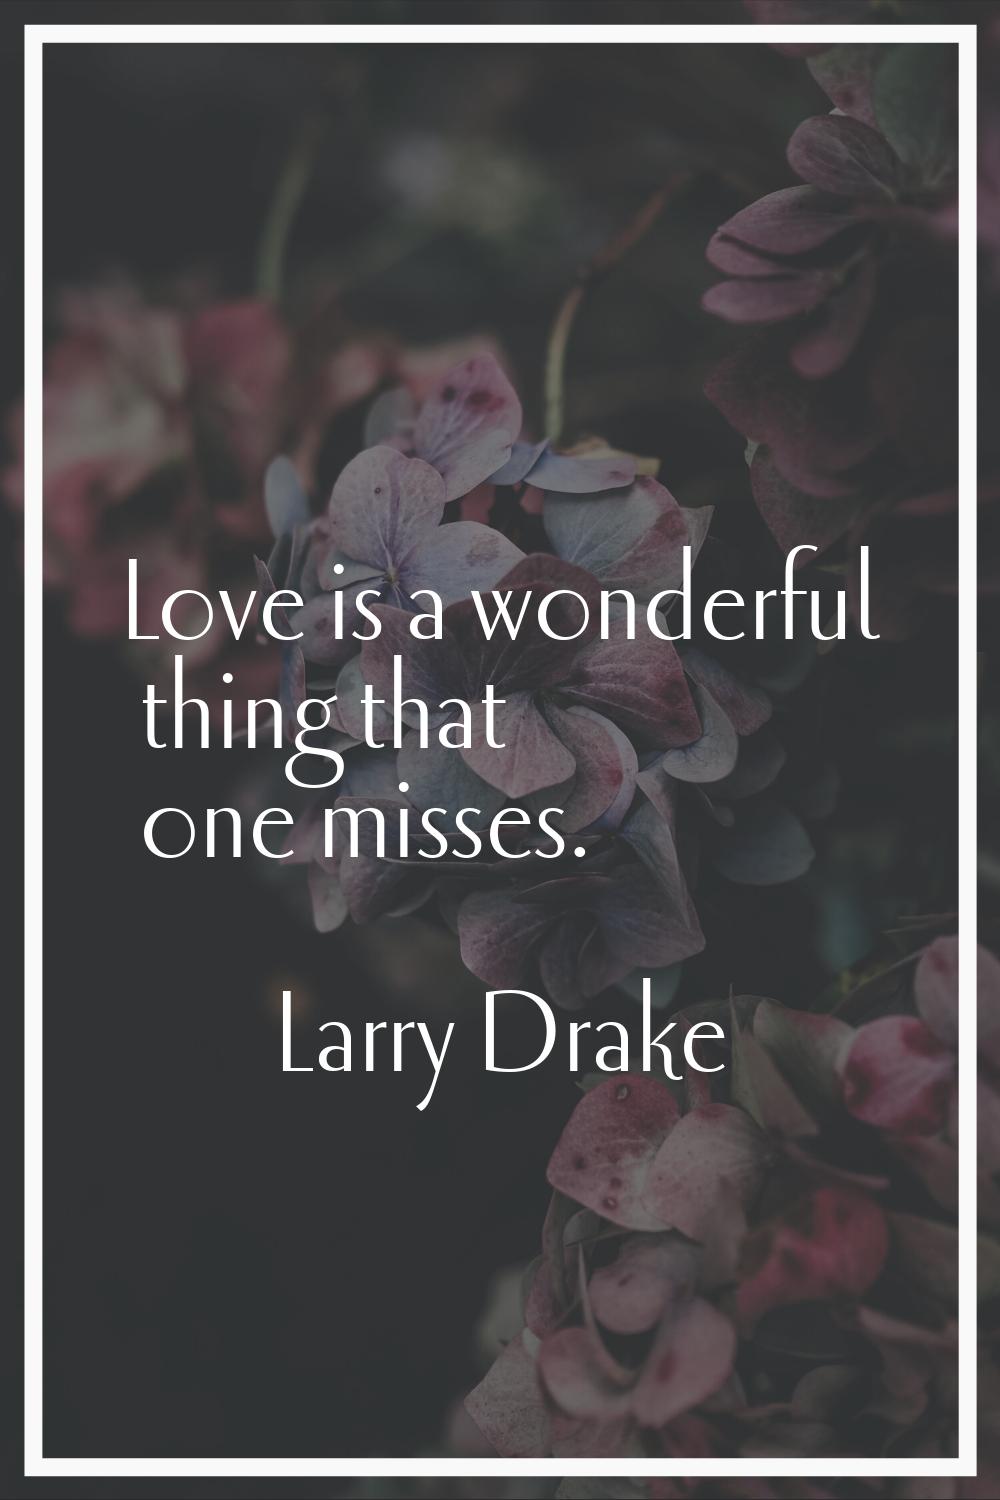 Love is a wonderful thing that one misses.